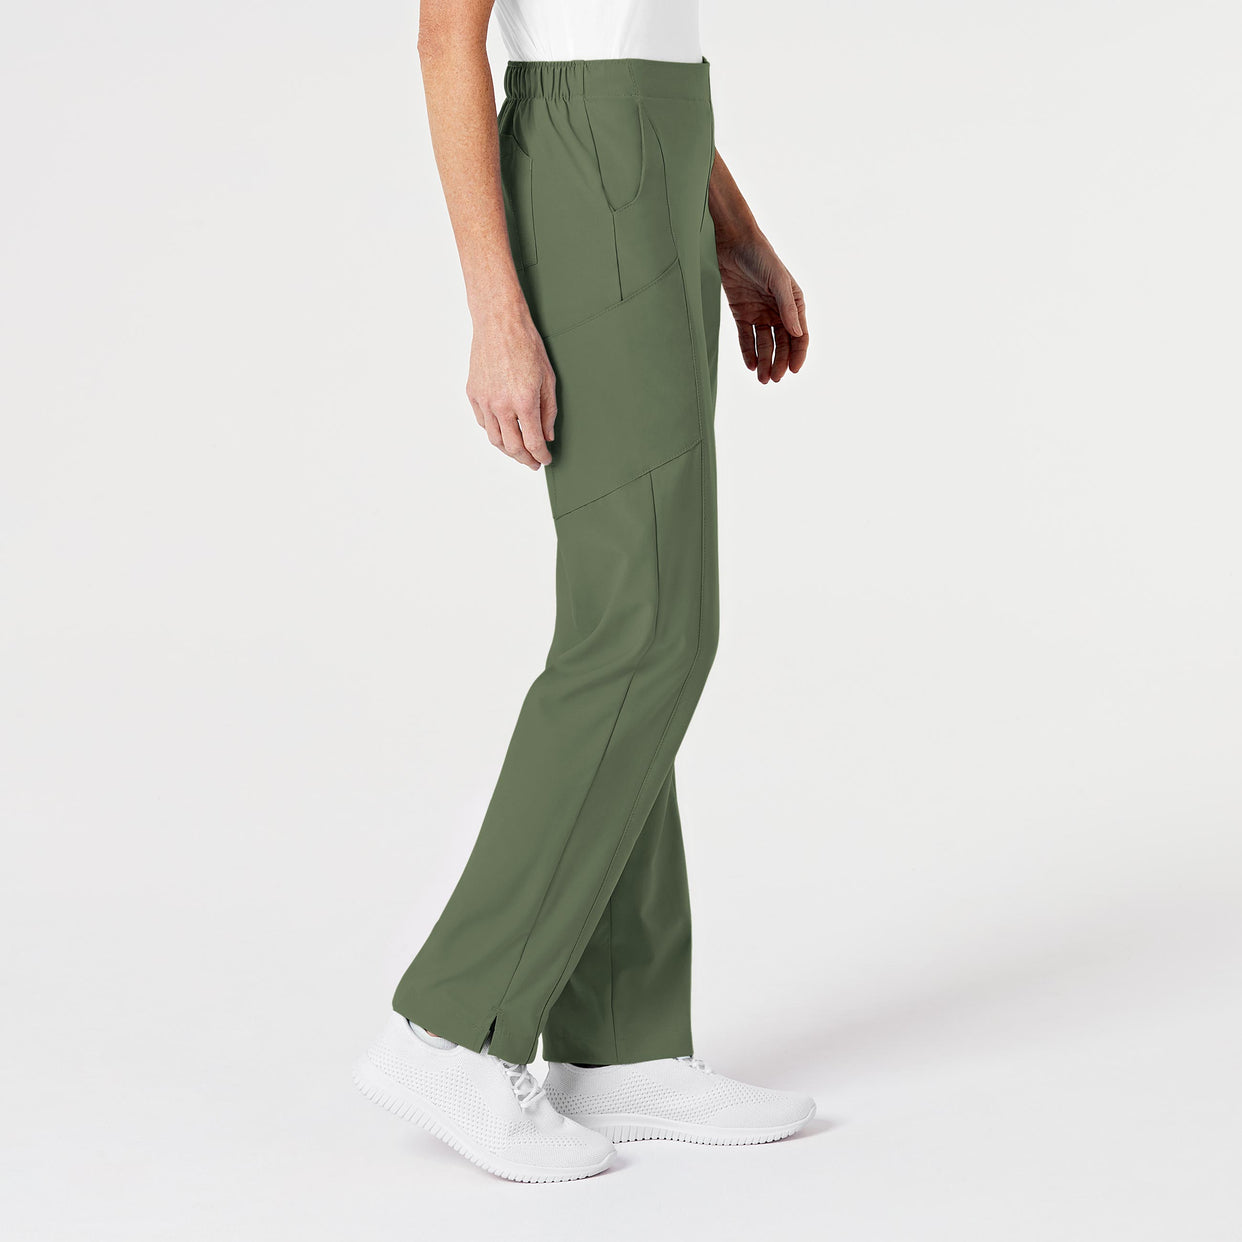 W123 Women's Flat Front Cargo Scrub Pant Olive side view